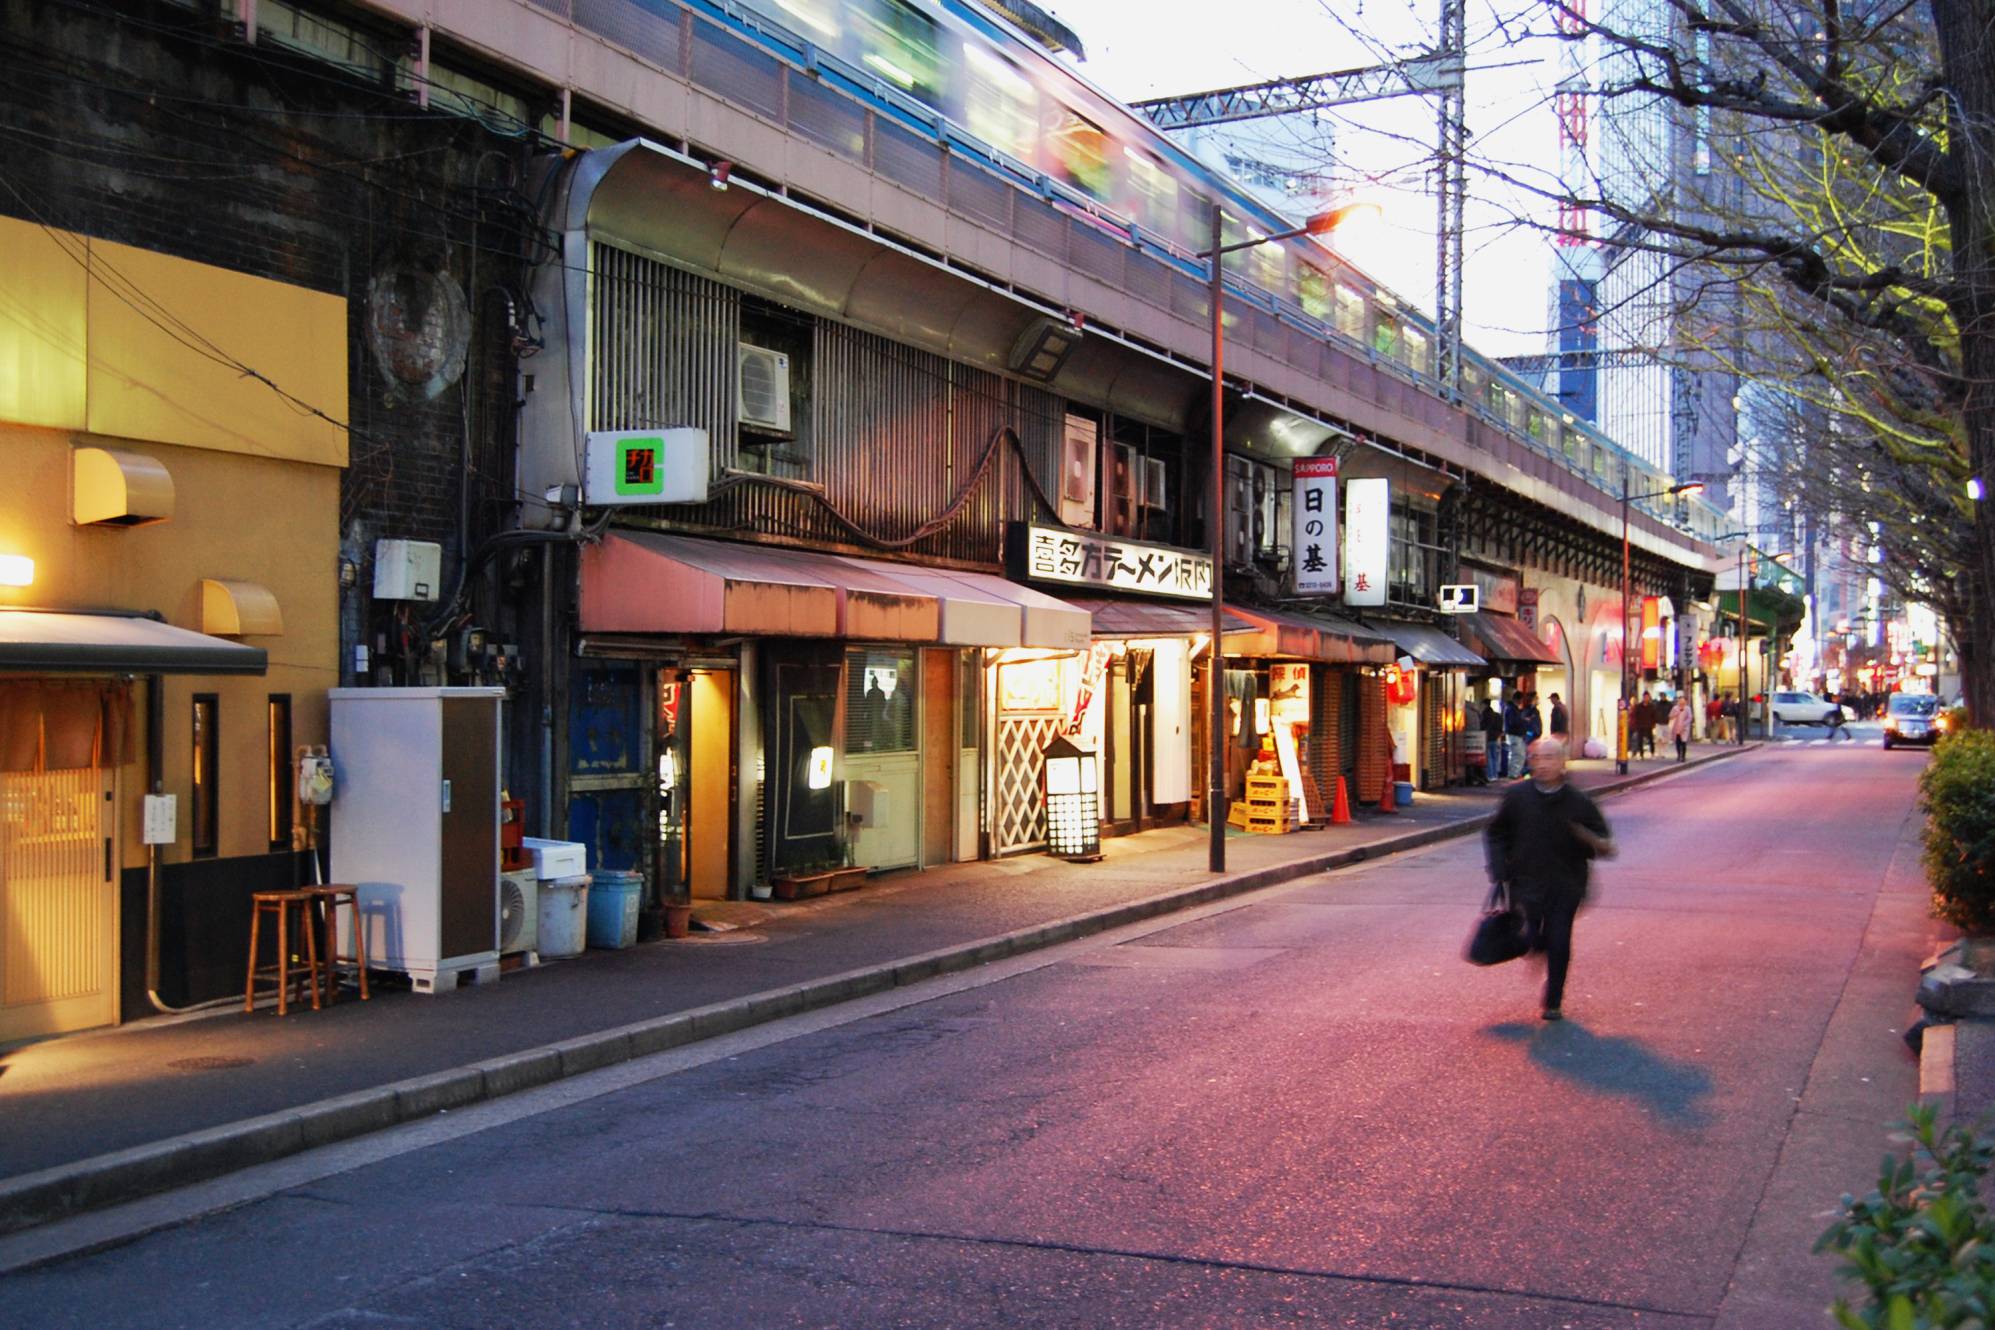 Culture and commerce thrive under Japan's elevated train tracks | The Japan  Times